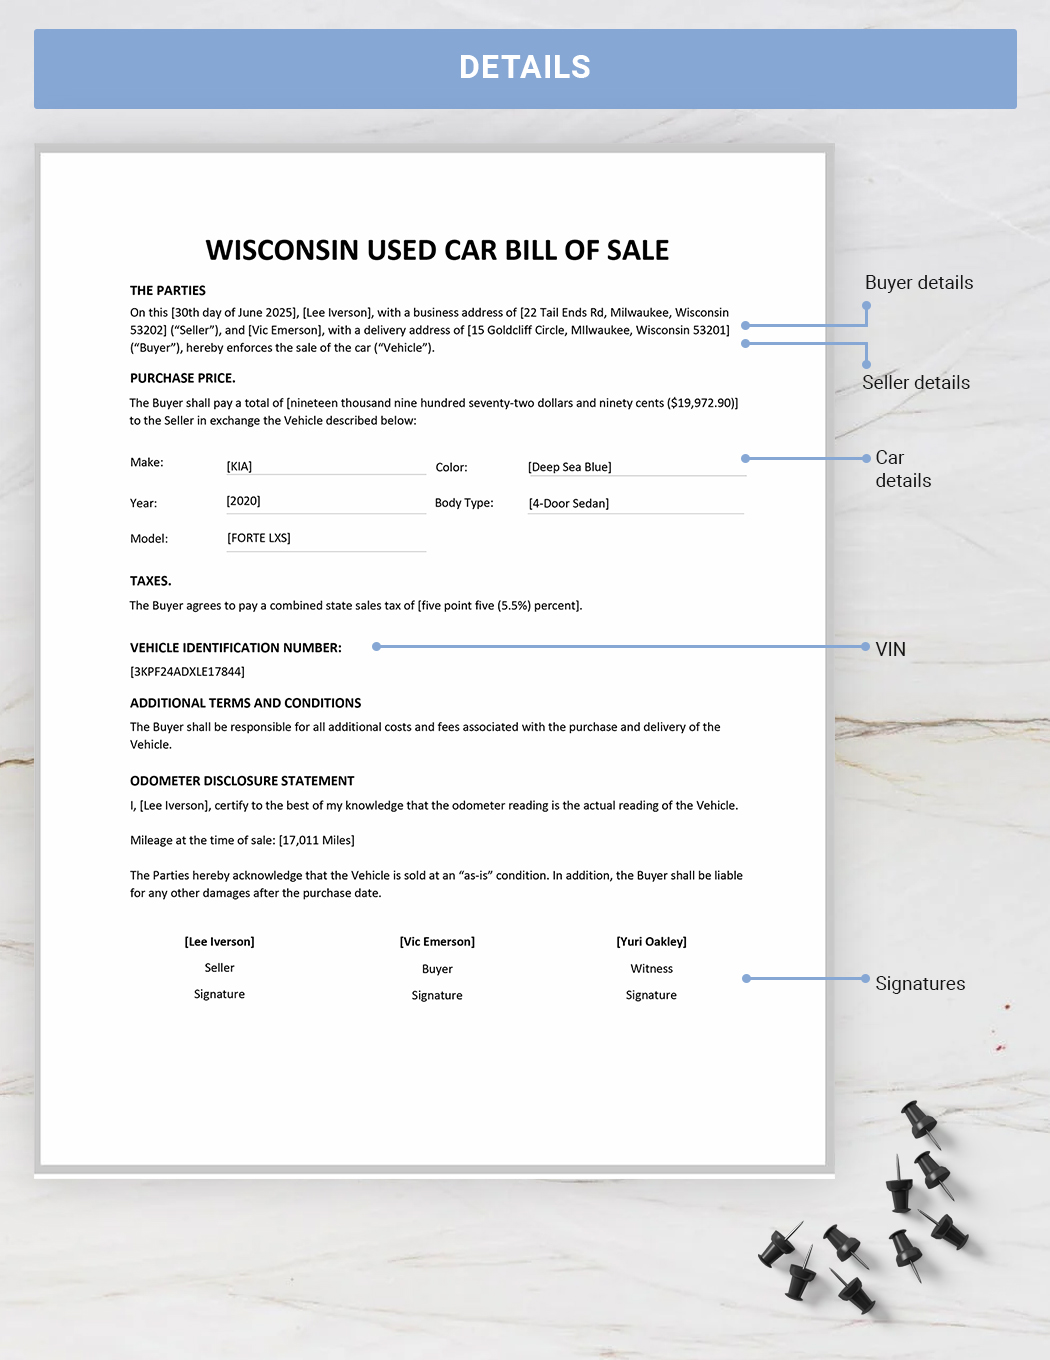 Wisconsin Used Car Bill of Sale Template